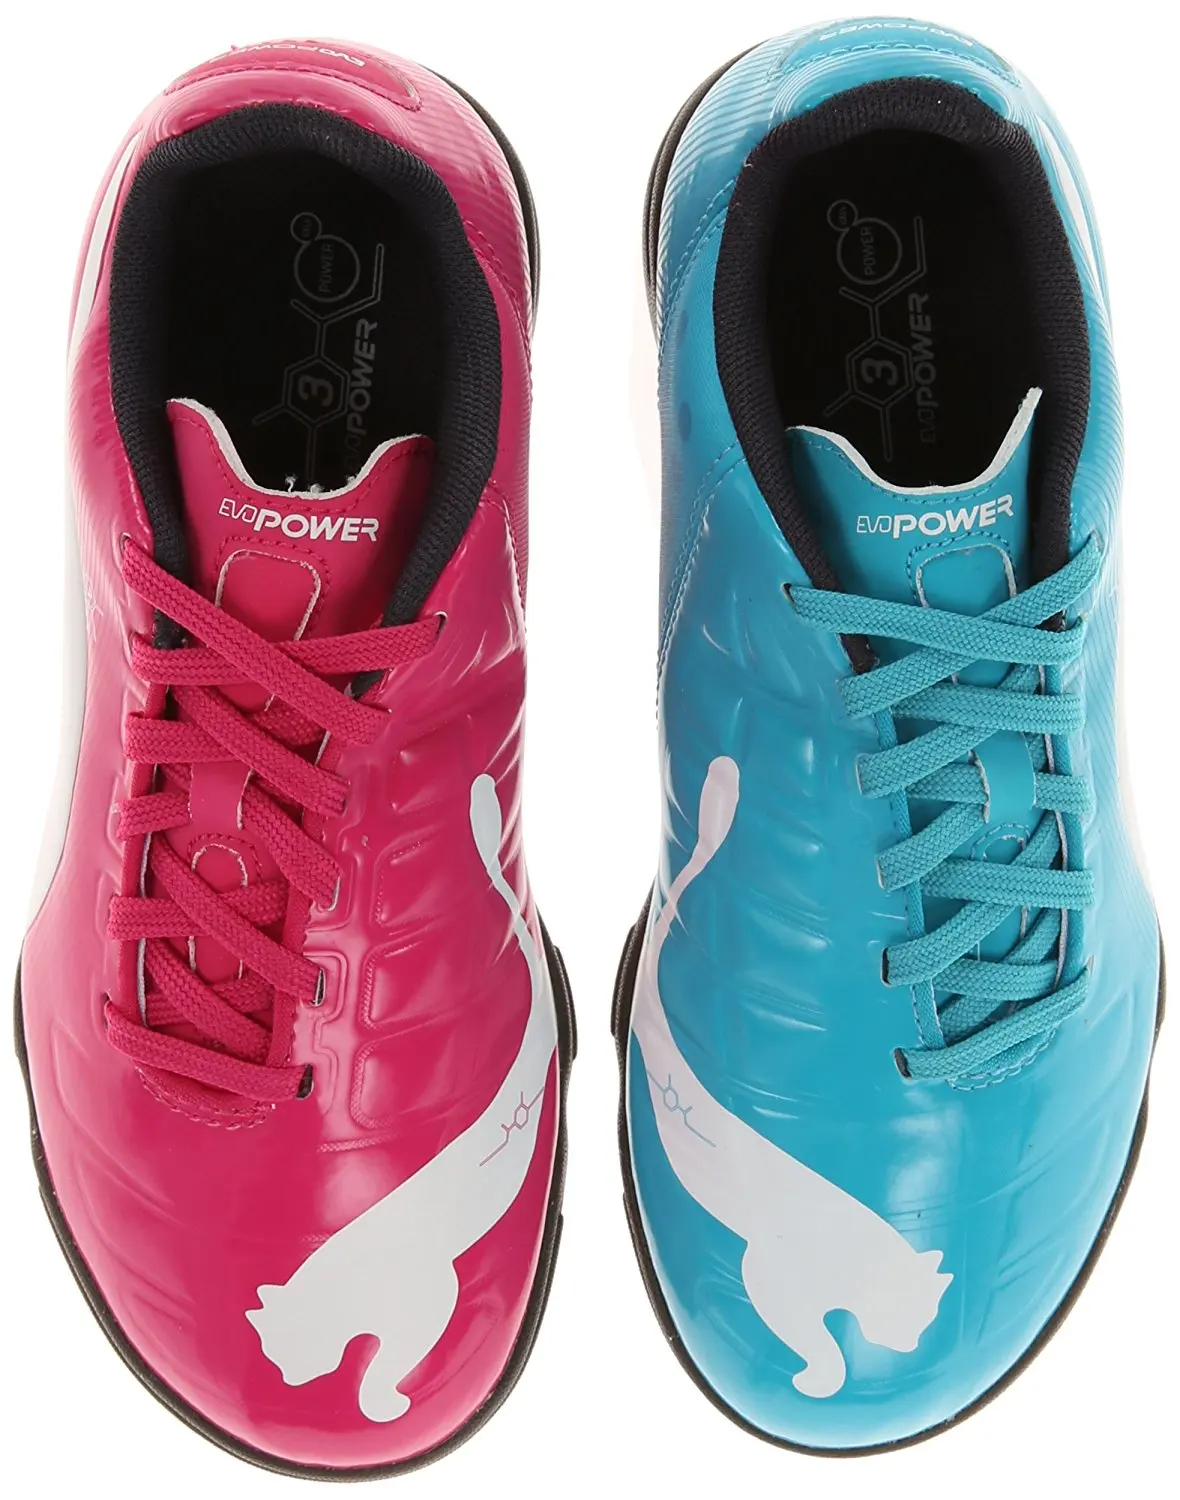 jf2021,puma evopower 4 indoor review 